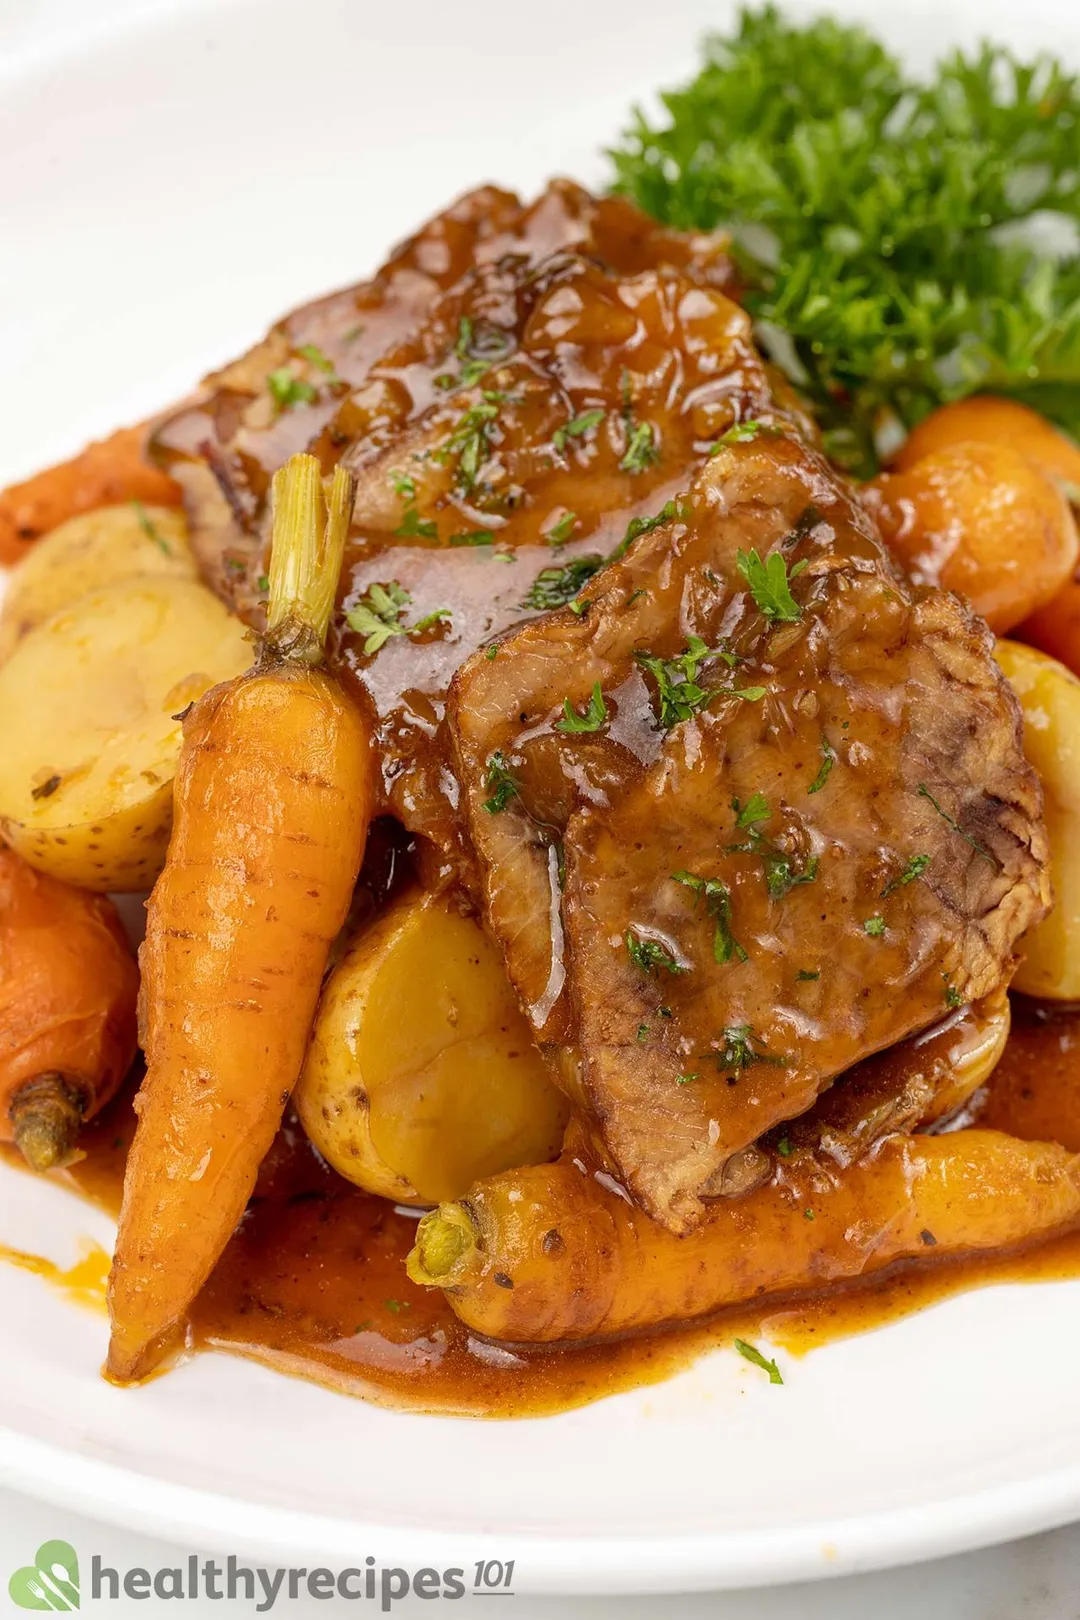 close-up shot of a plate of cooked beef brisket sliced and half potatoes, carrot and parsley for garnish